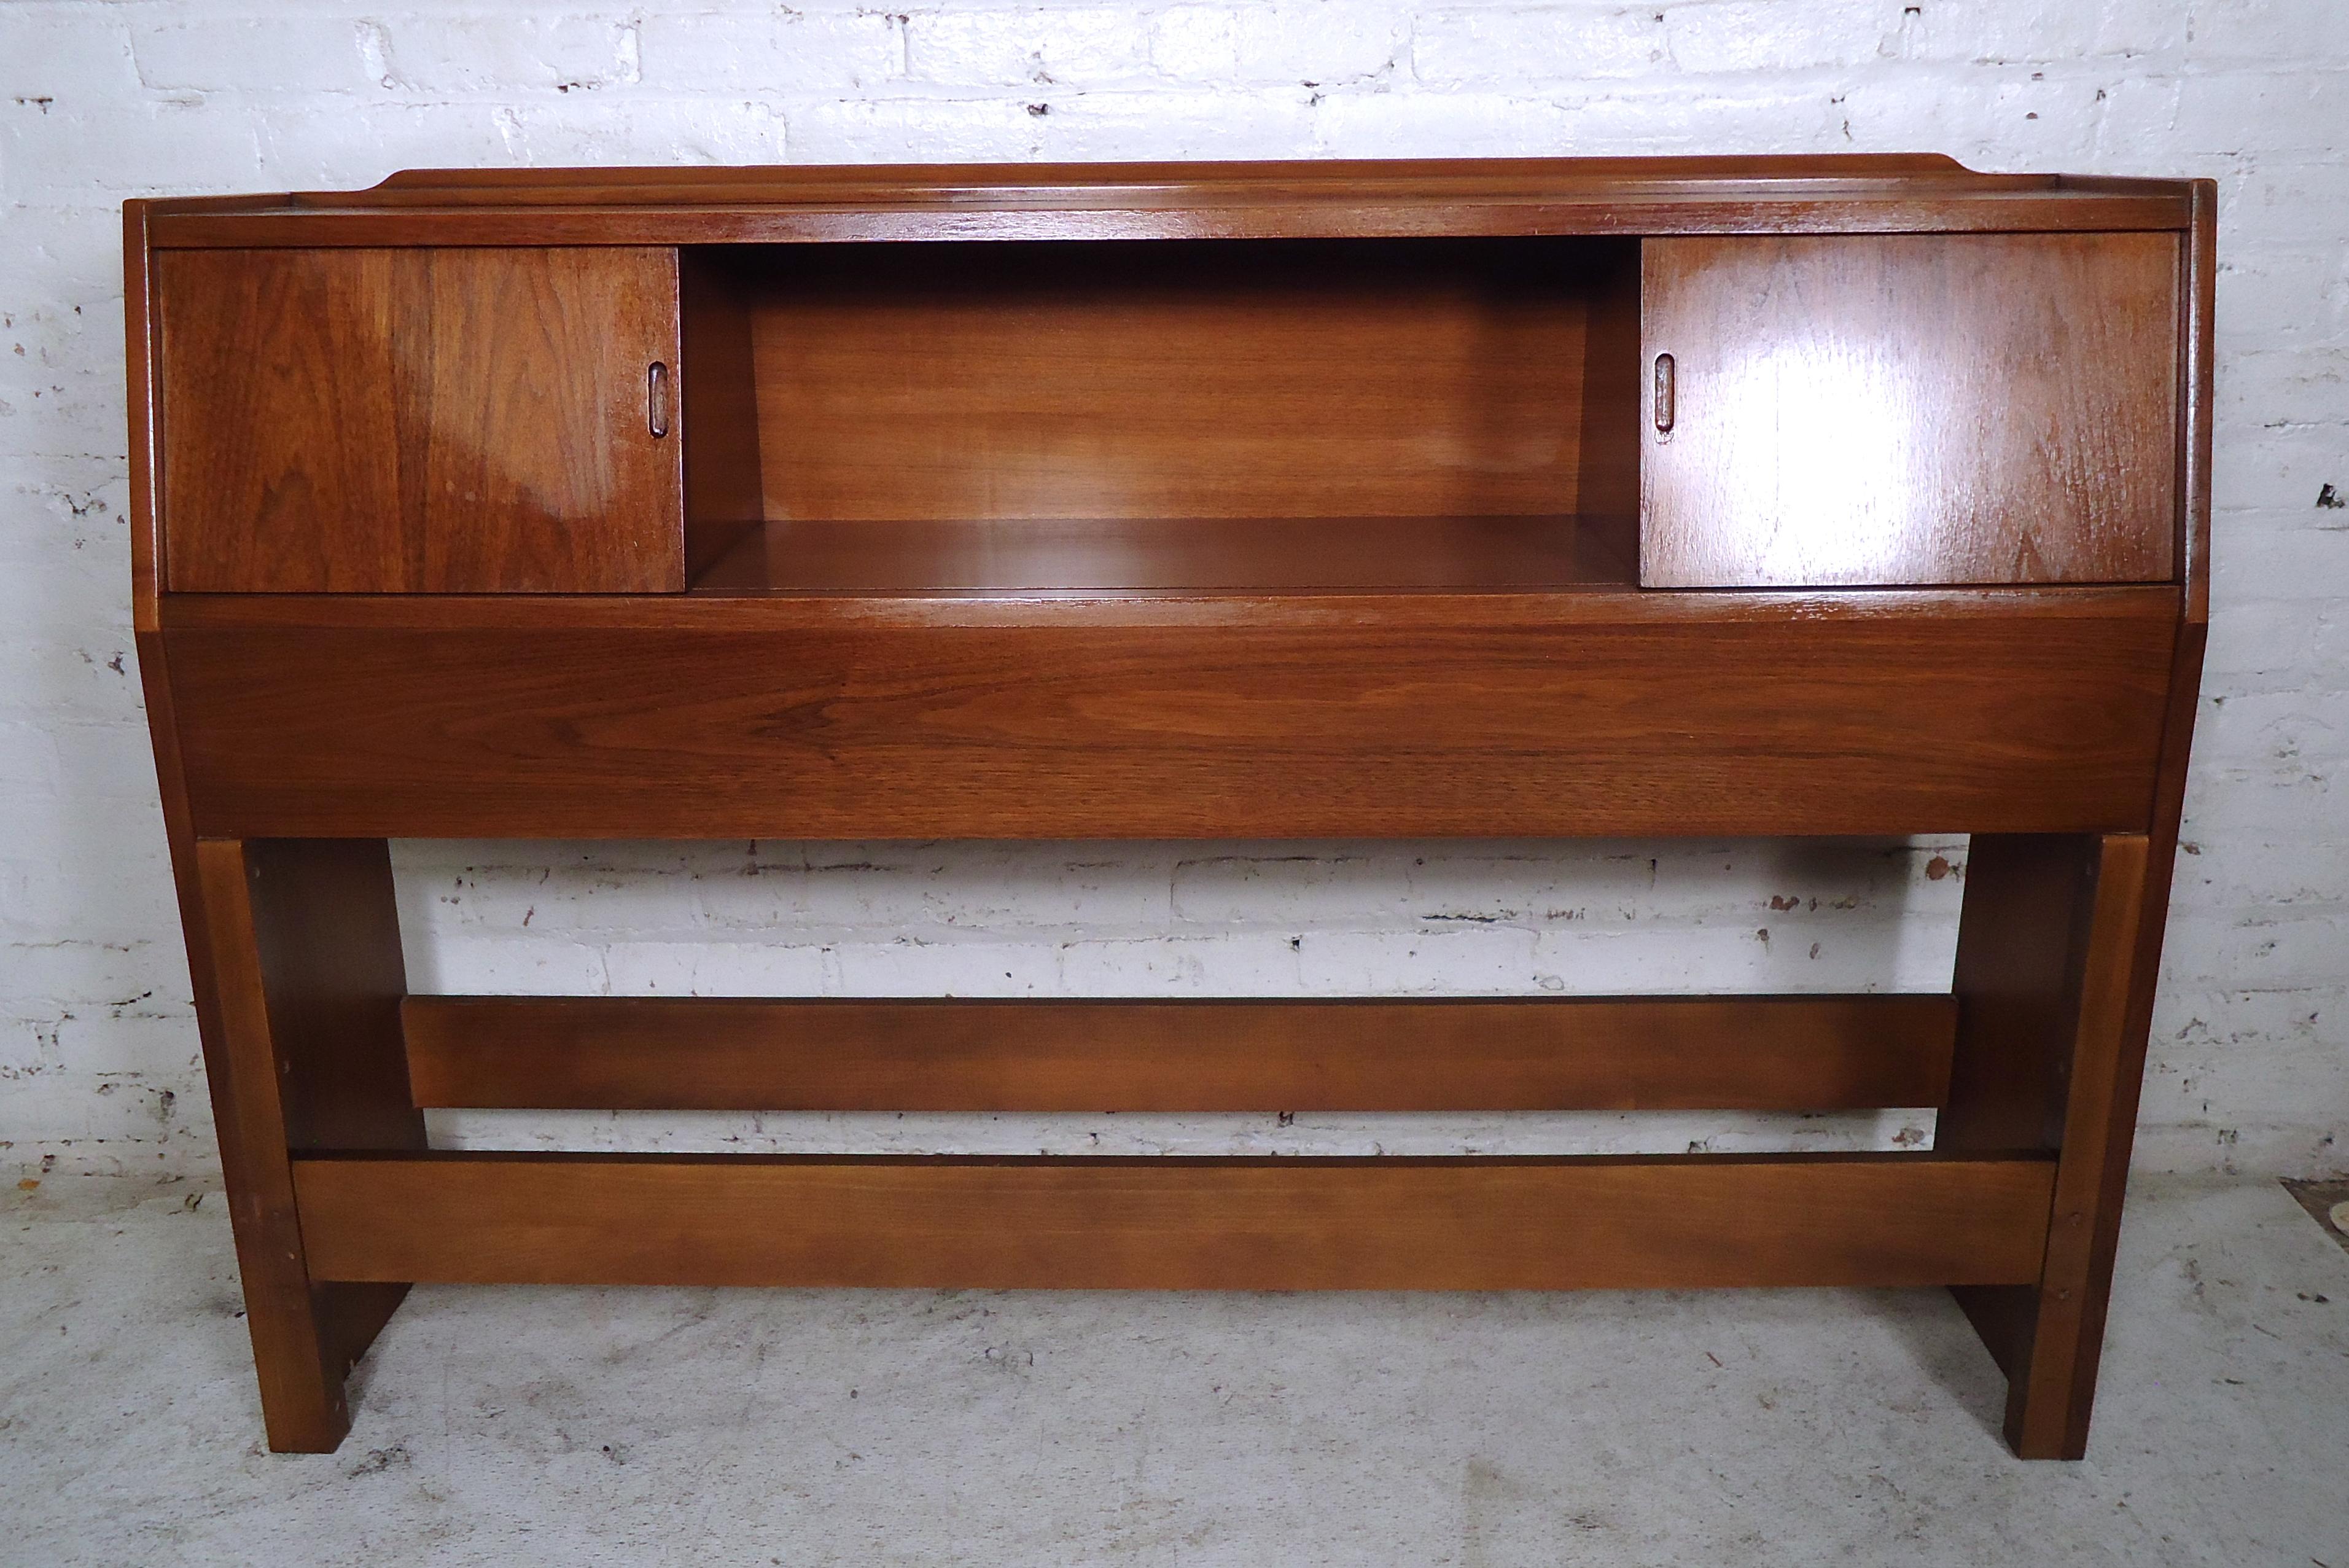 Vintage modern headboard featured in rich walnut grain, two sliding doors with storage space, and a middle storage compartment. 
(Please confirm item location - NY or NJ - with dealer).